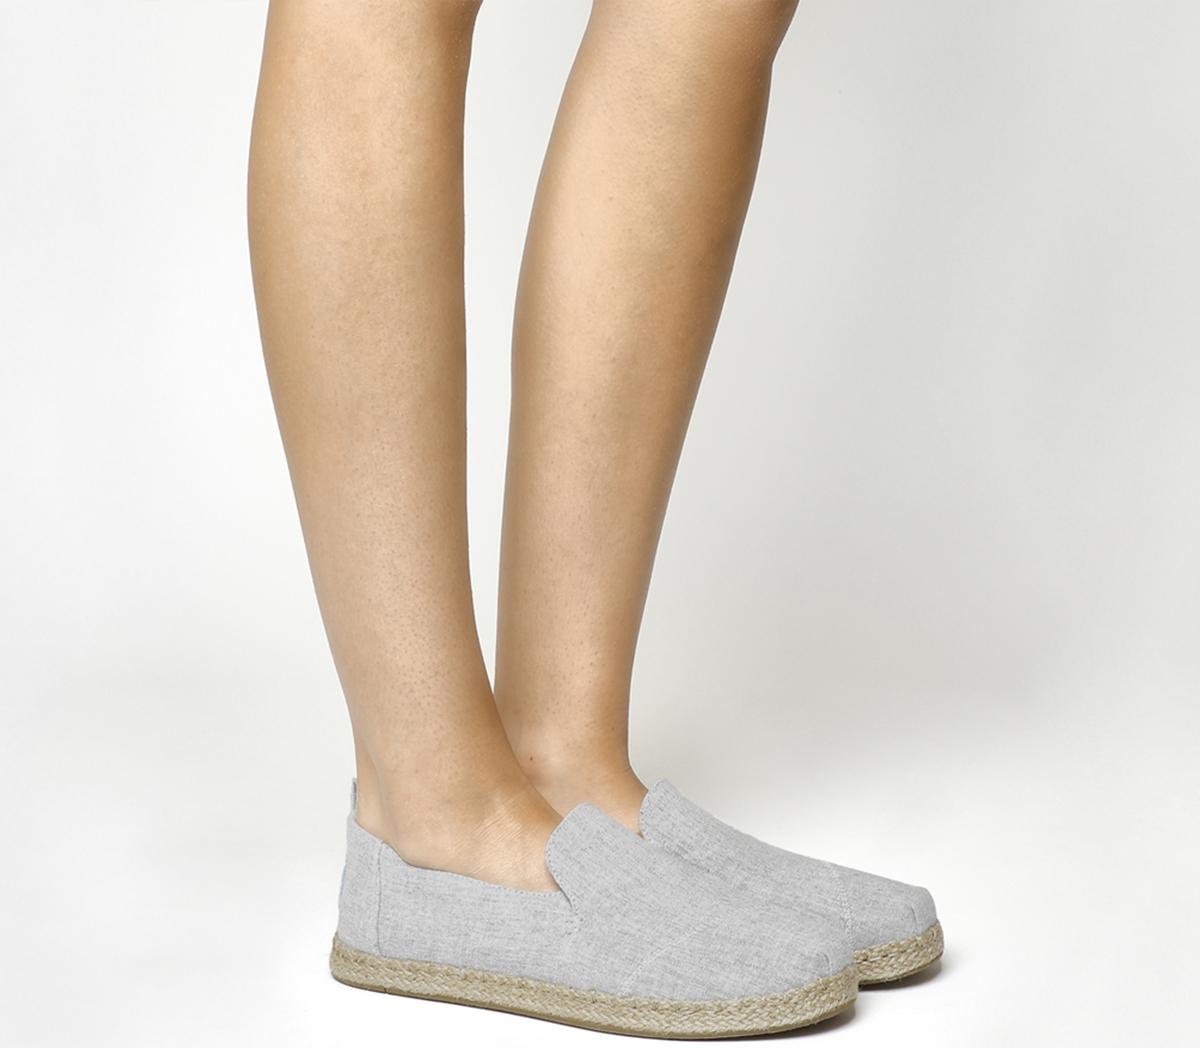 toms chambray espadrilles